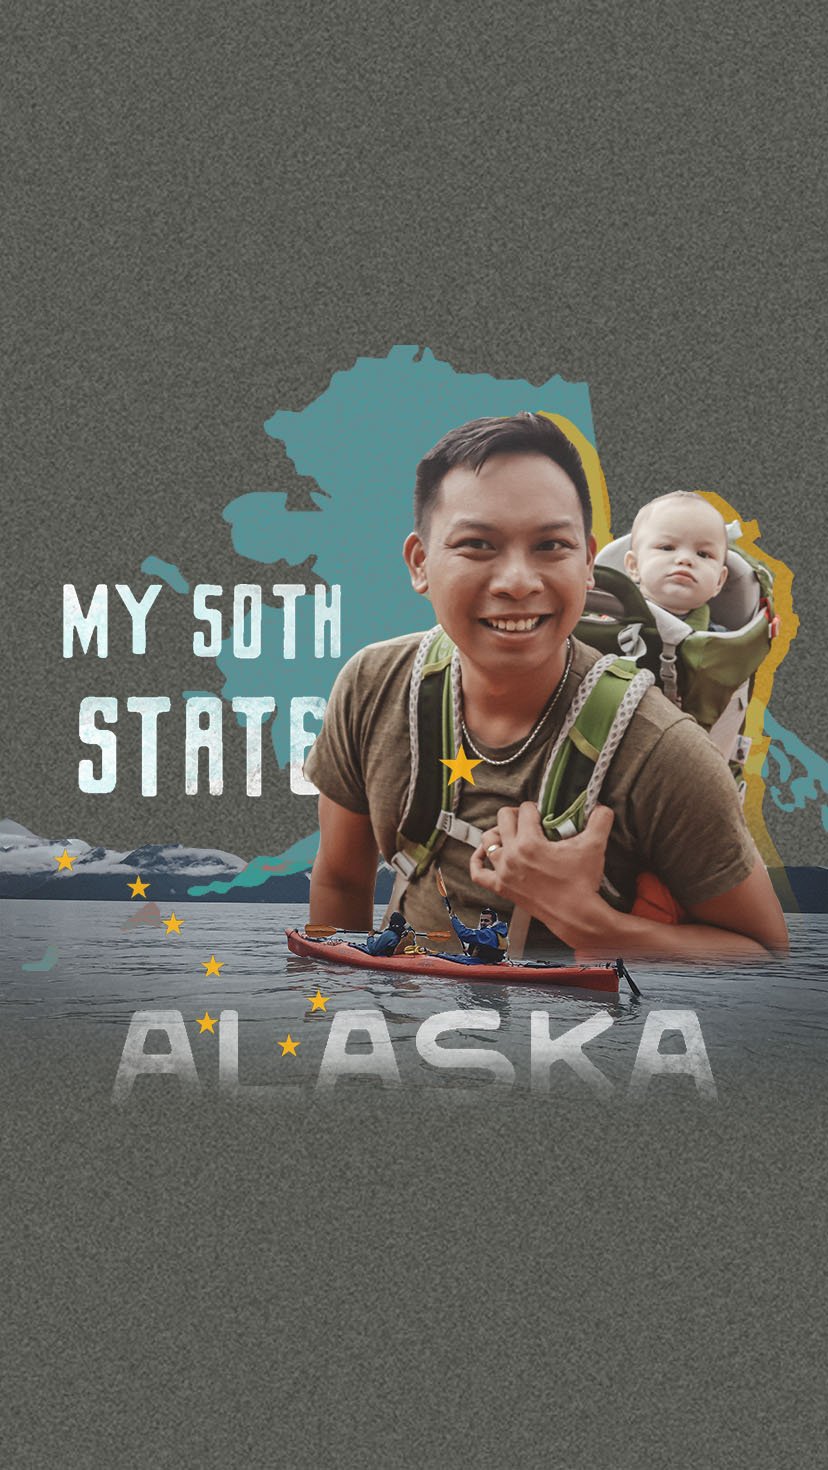 ALASKA | I Made it to My 50th State